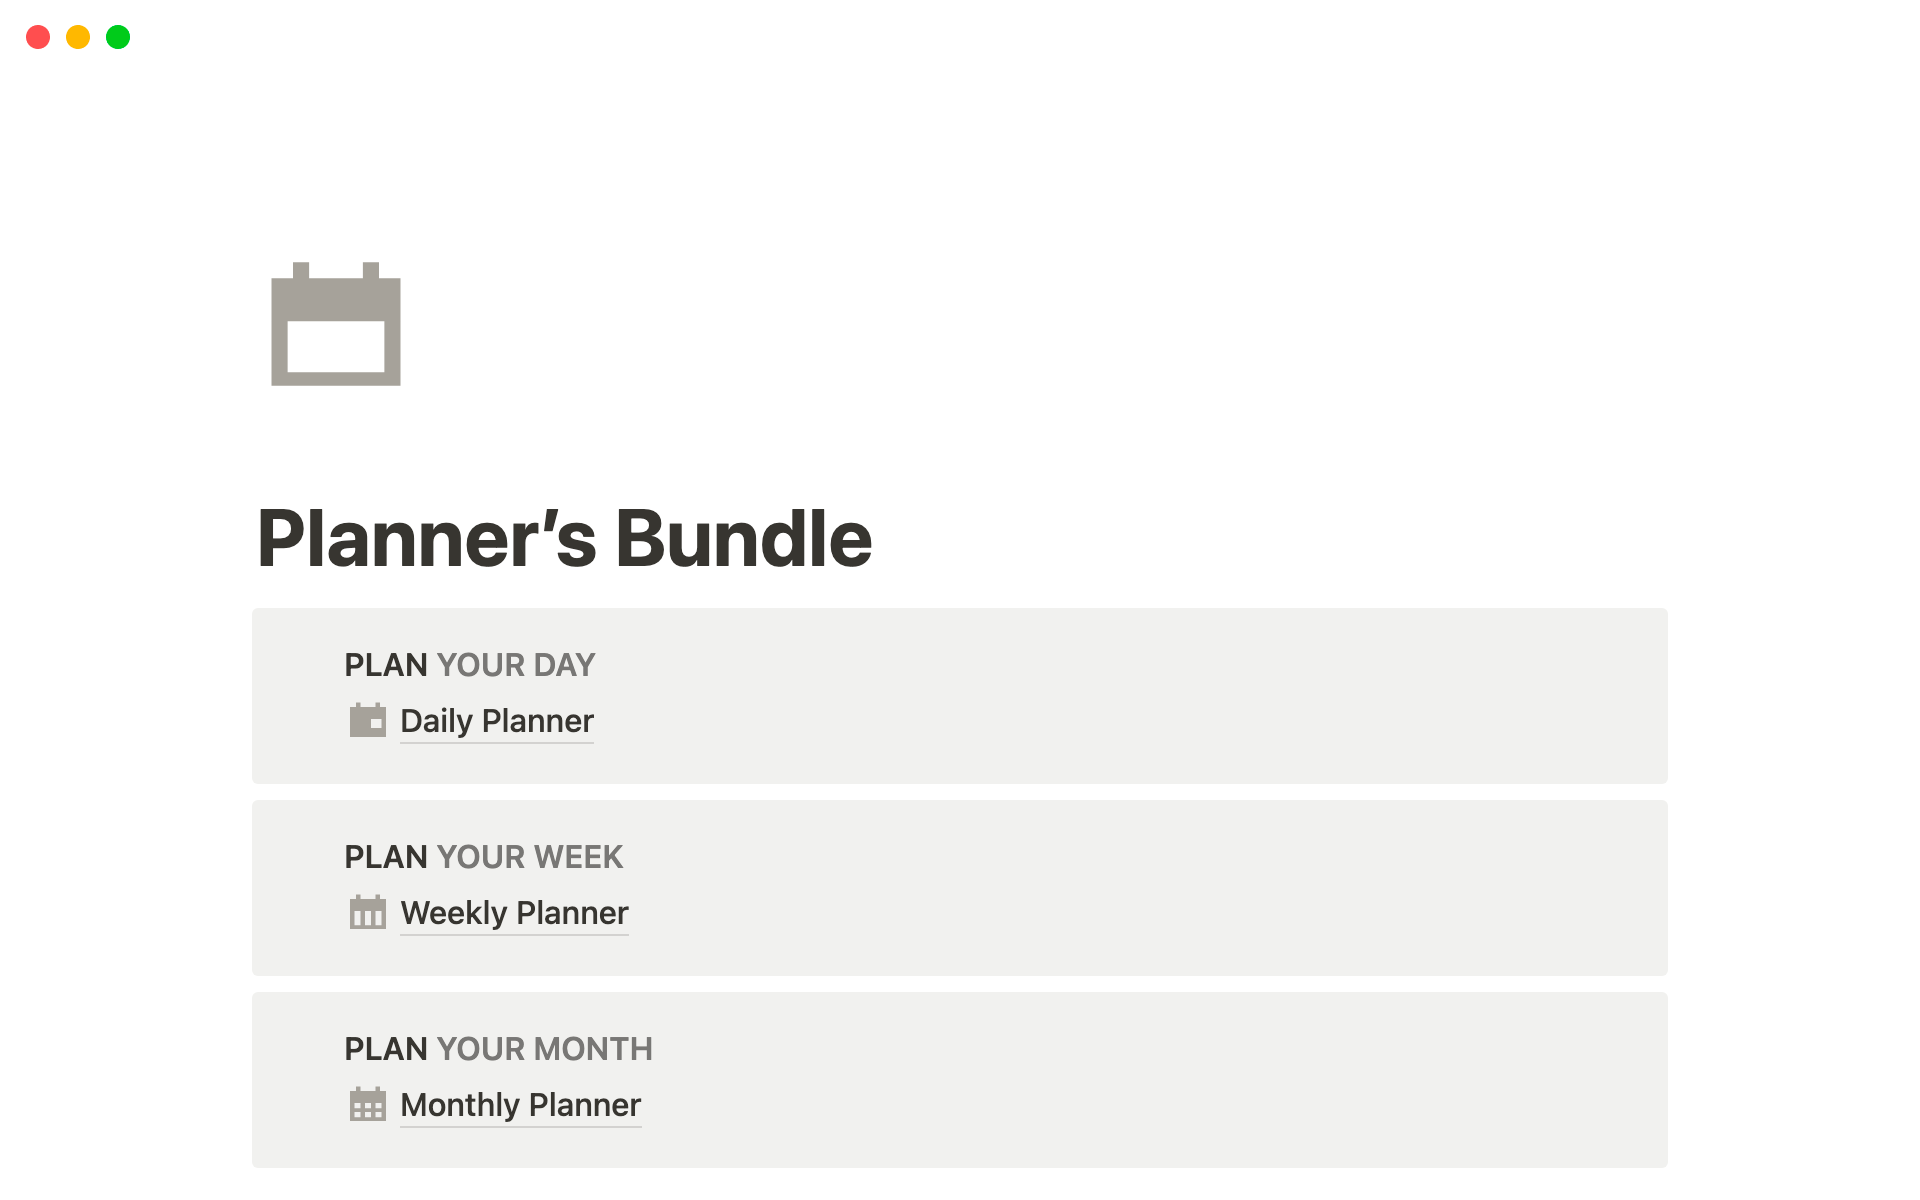 Stay organized by using our Free Daily Planner, Weekly Planner and Monthly Planner Bundle.